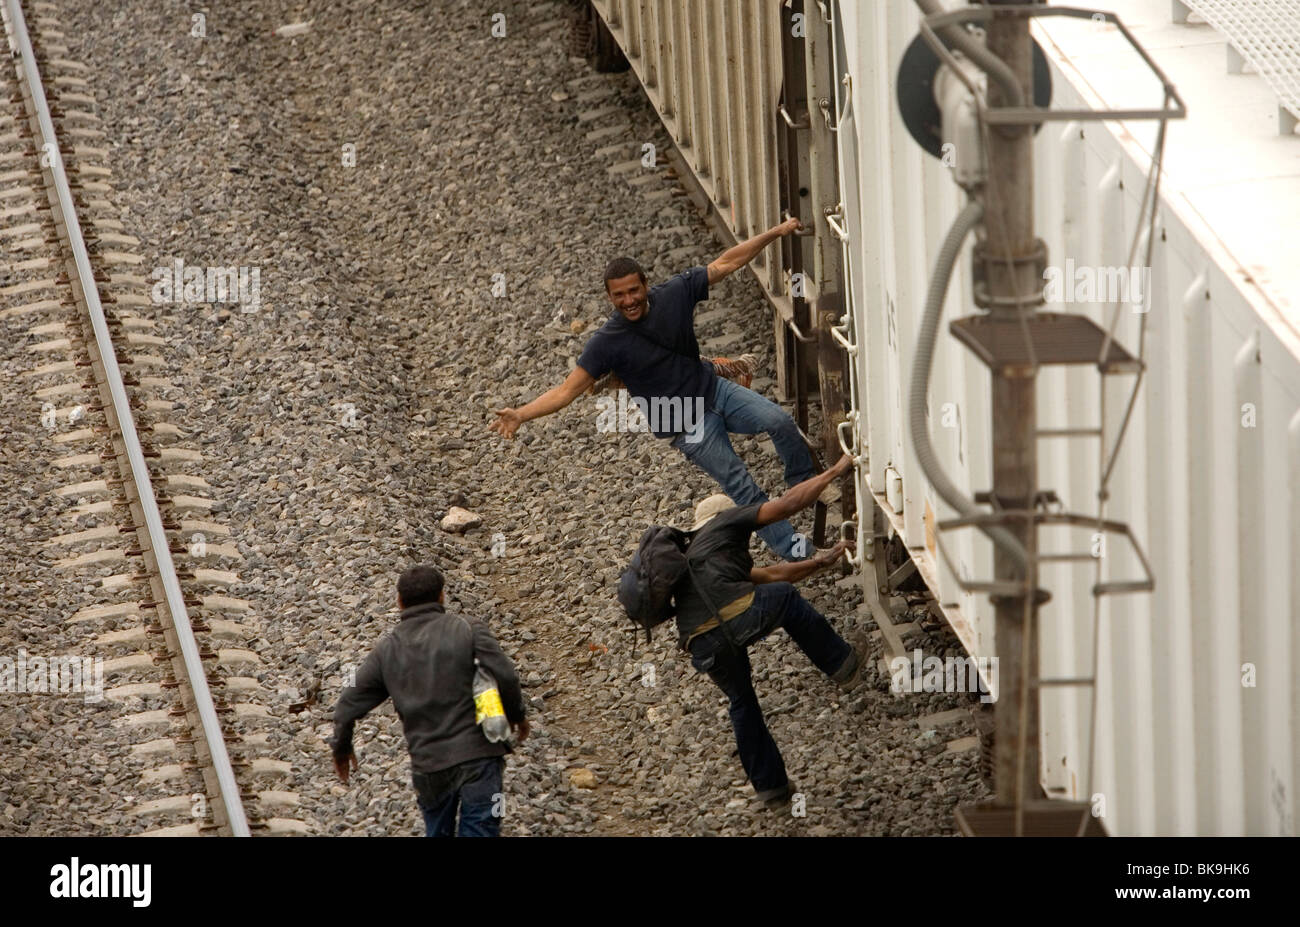 Undocumented Central American migrants traveling across Mexico to work in the United States jump a cargo train in Mexico City Stock Photo